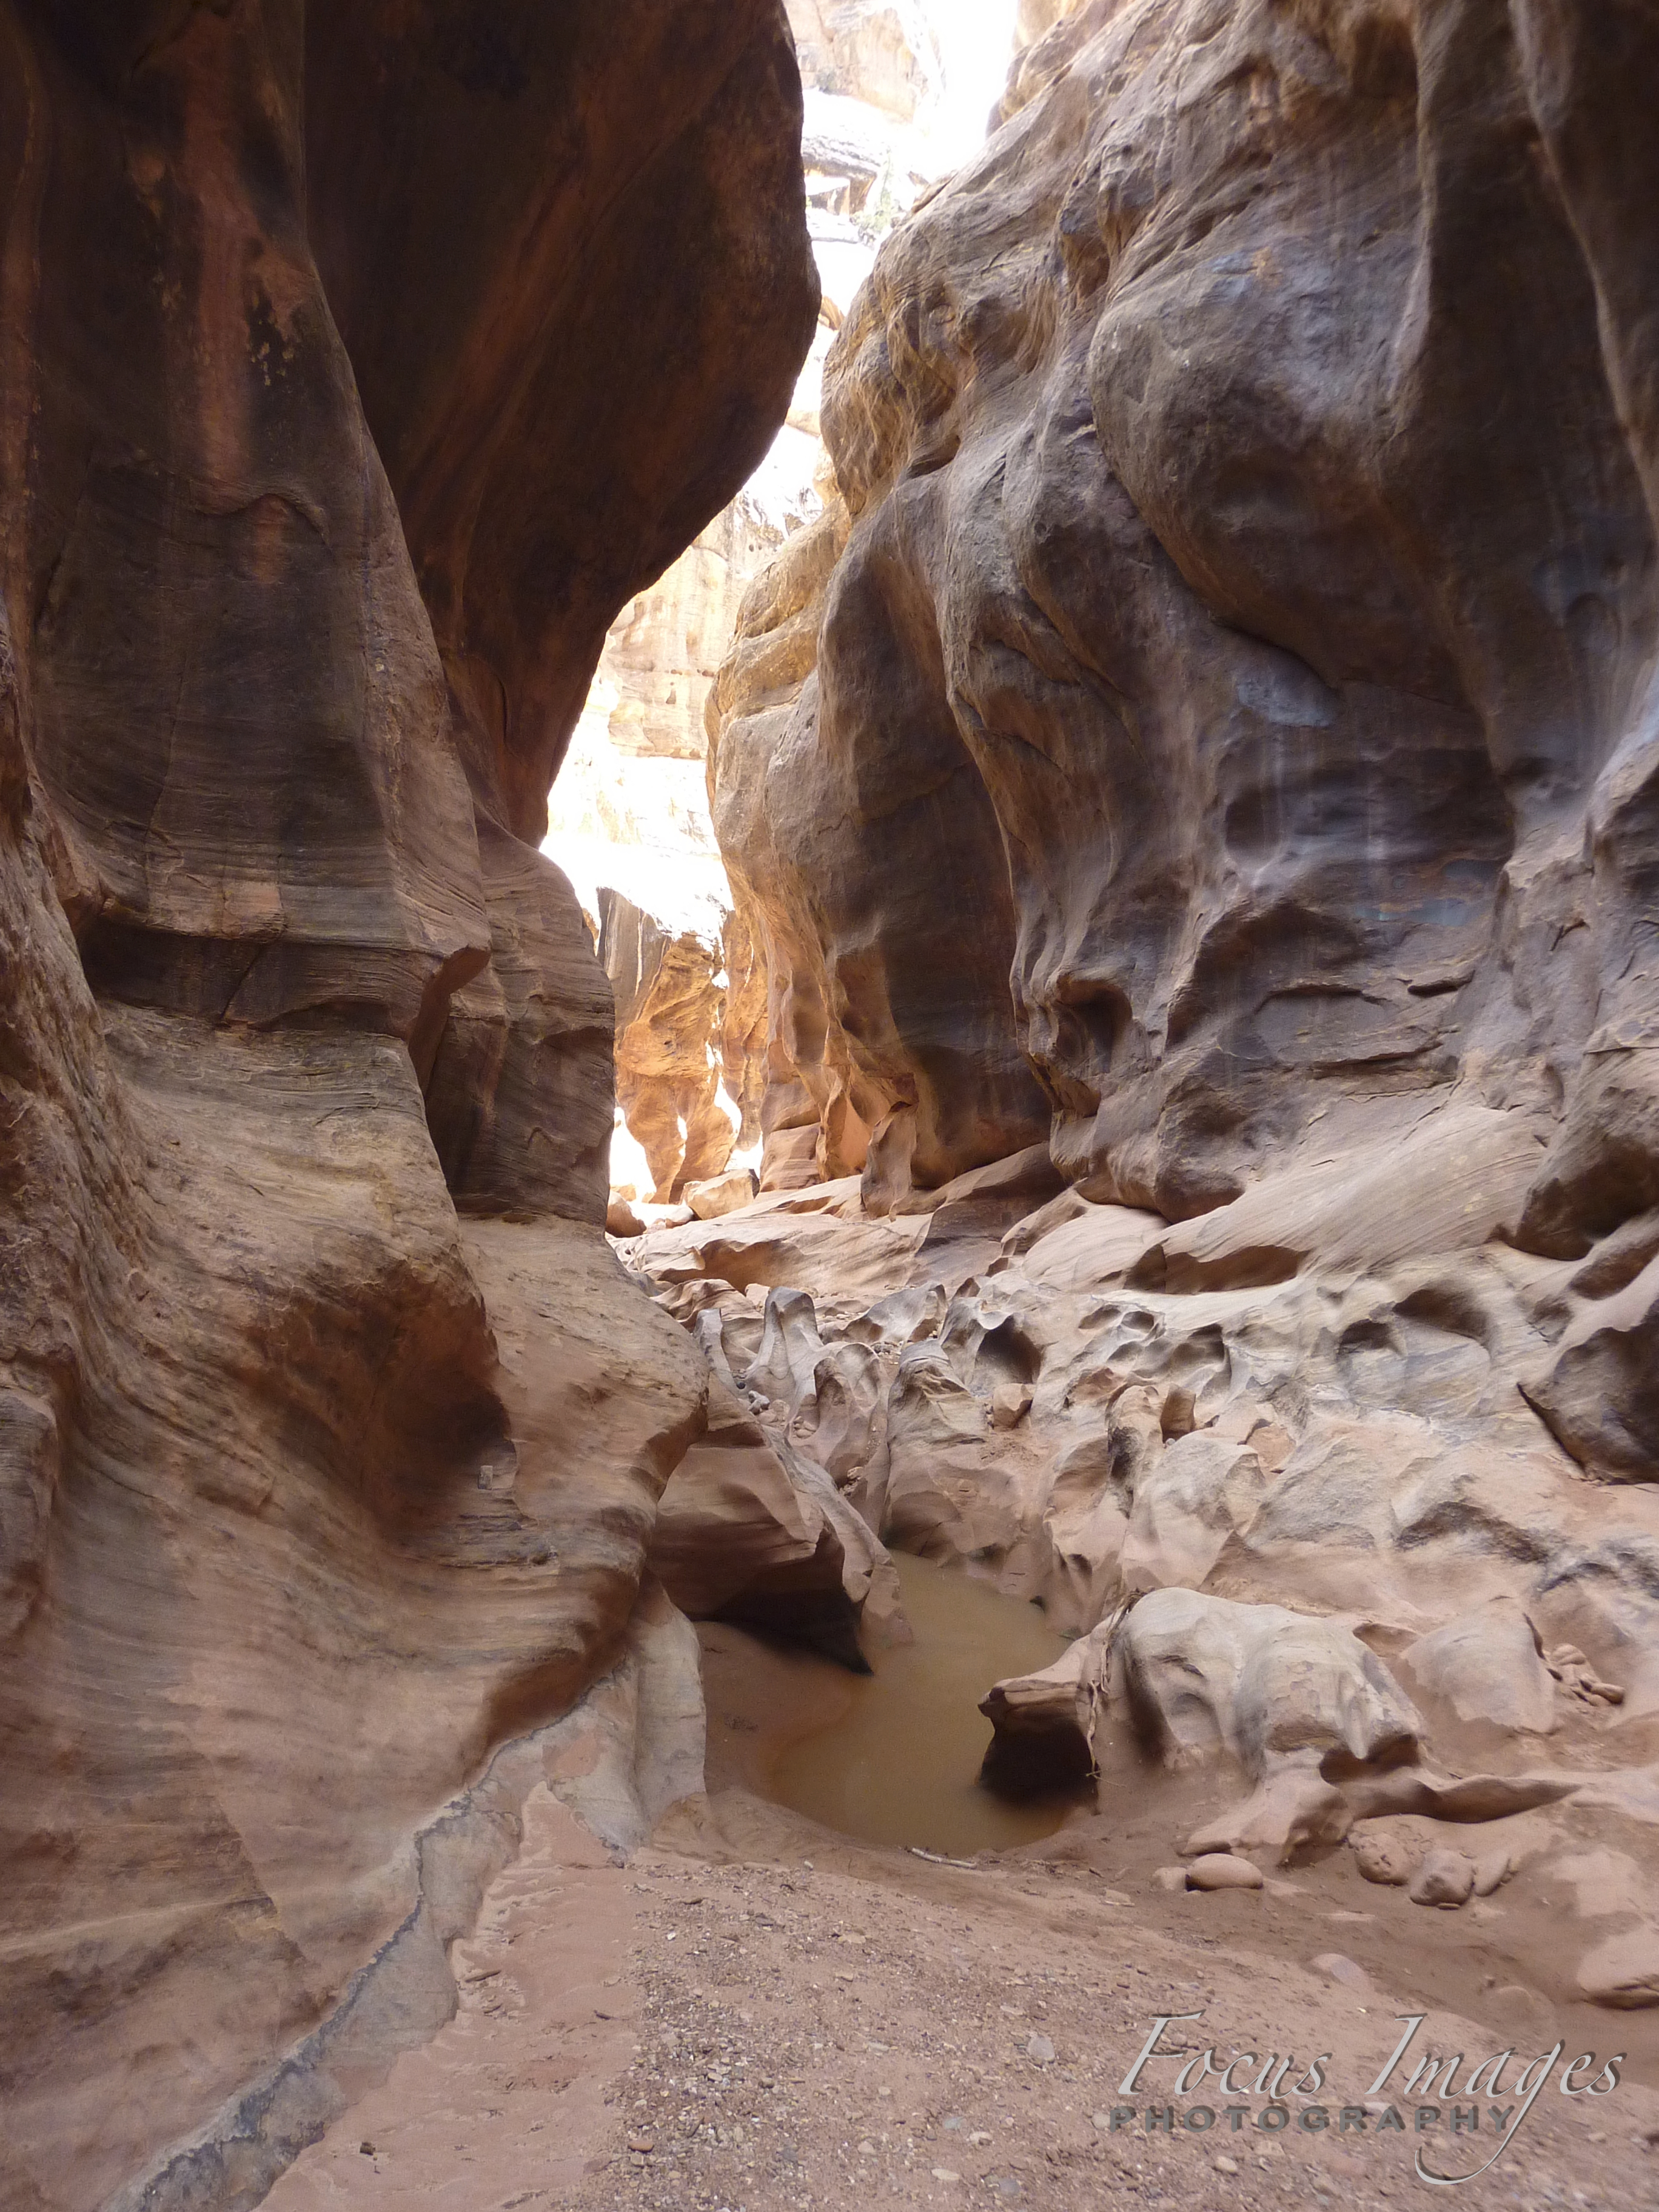 The Black Hole in the Lower White Canyon – VIDEO | Focus Images Photography2736 x 3648